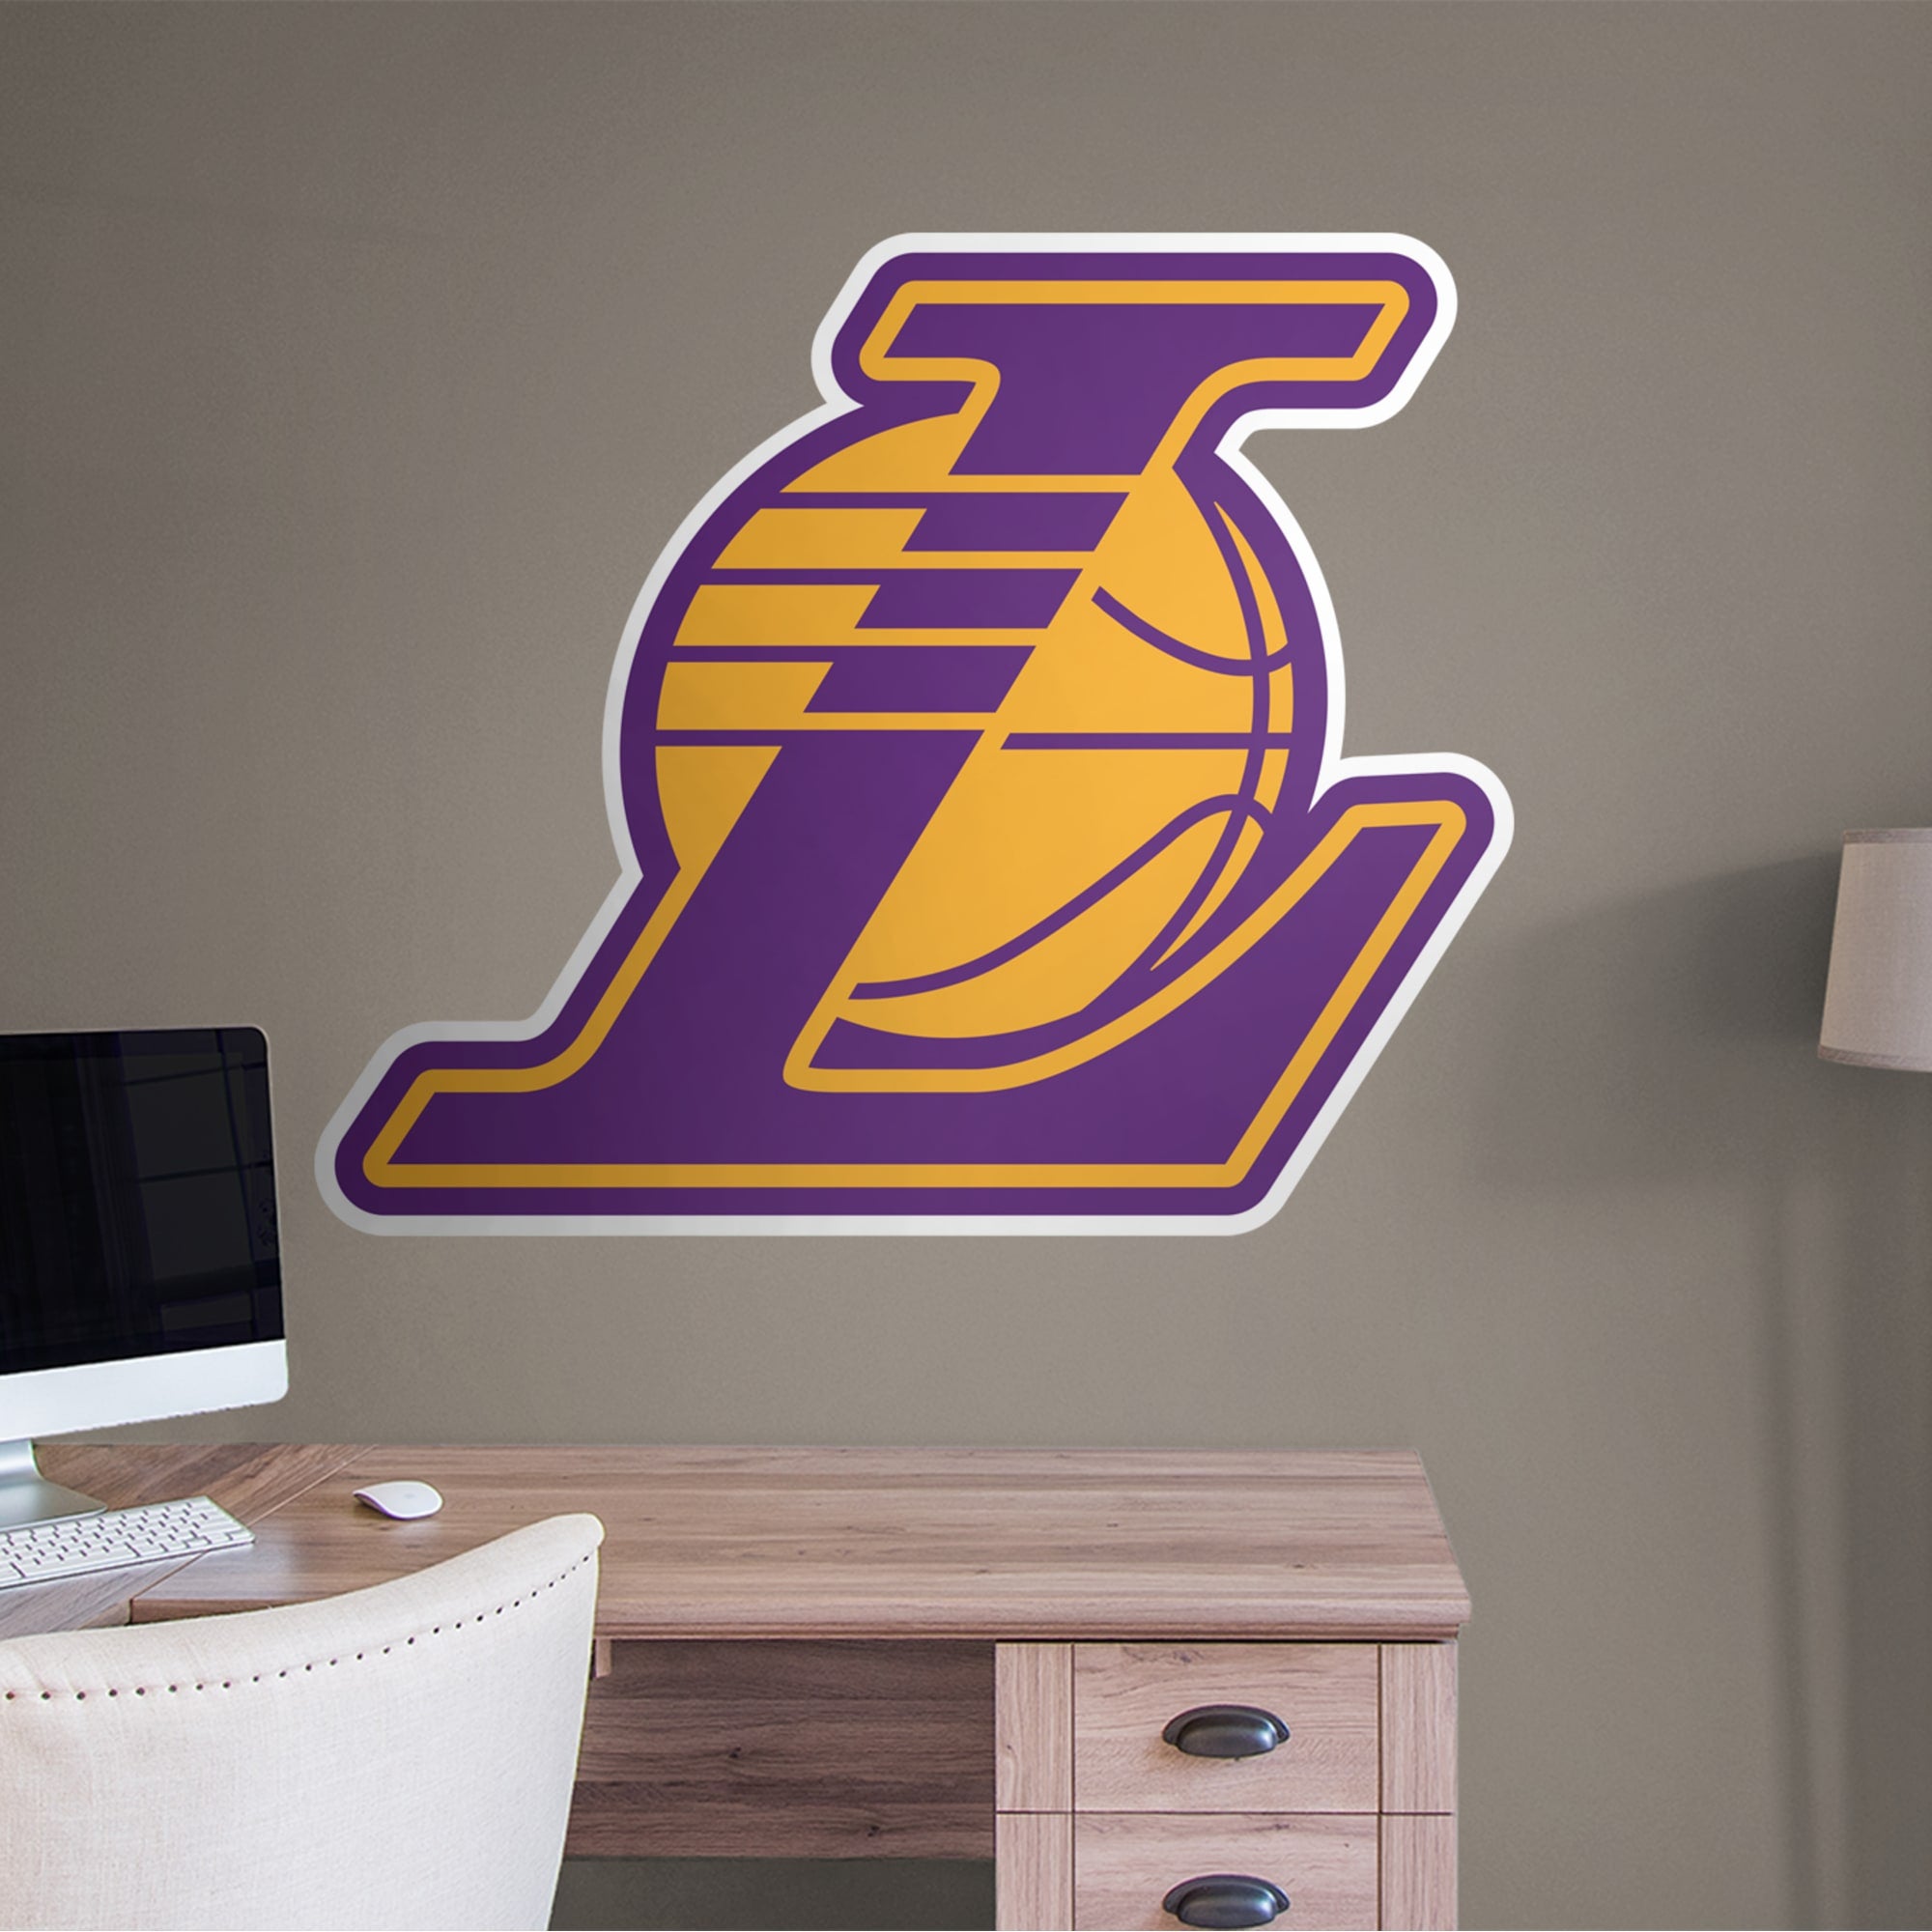 Los Angeles Lakers: Alternate Logo - Officially Licensed NBA Removable Wall Decal 46.0"W x 38.0"H by Fathead | Vinyl